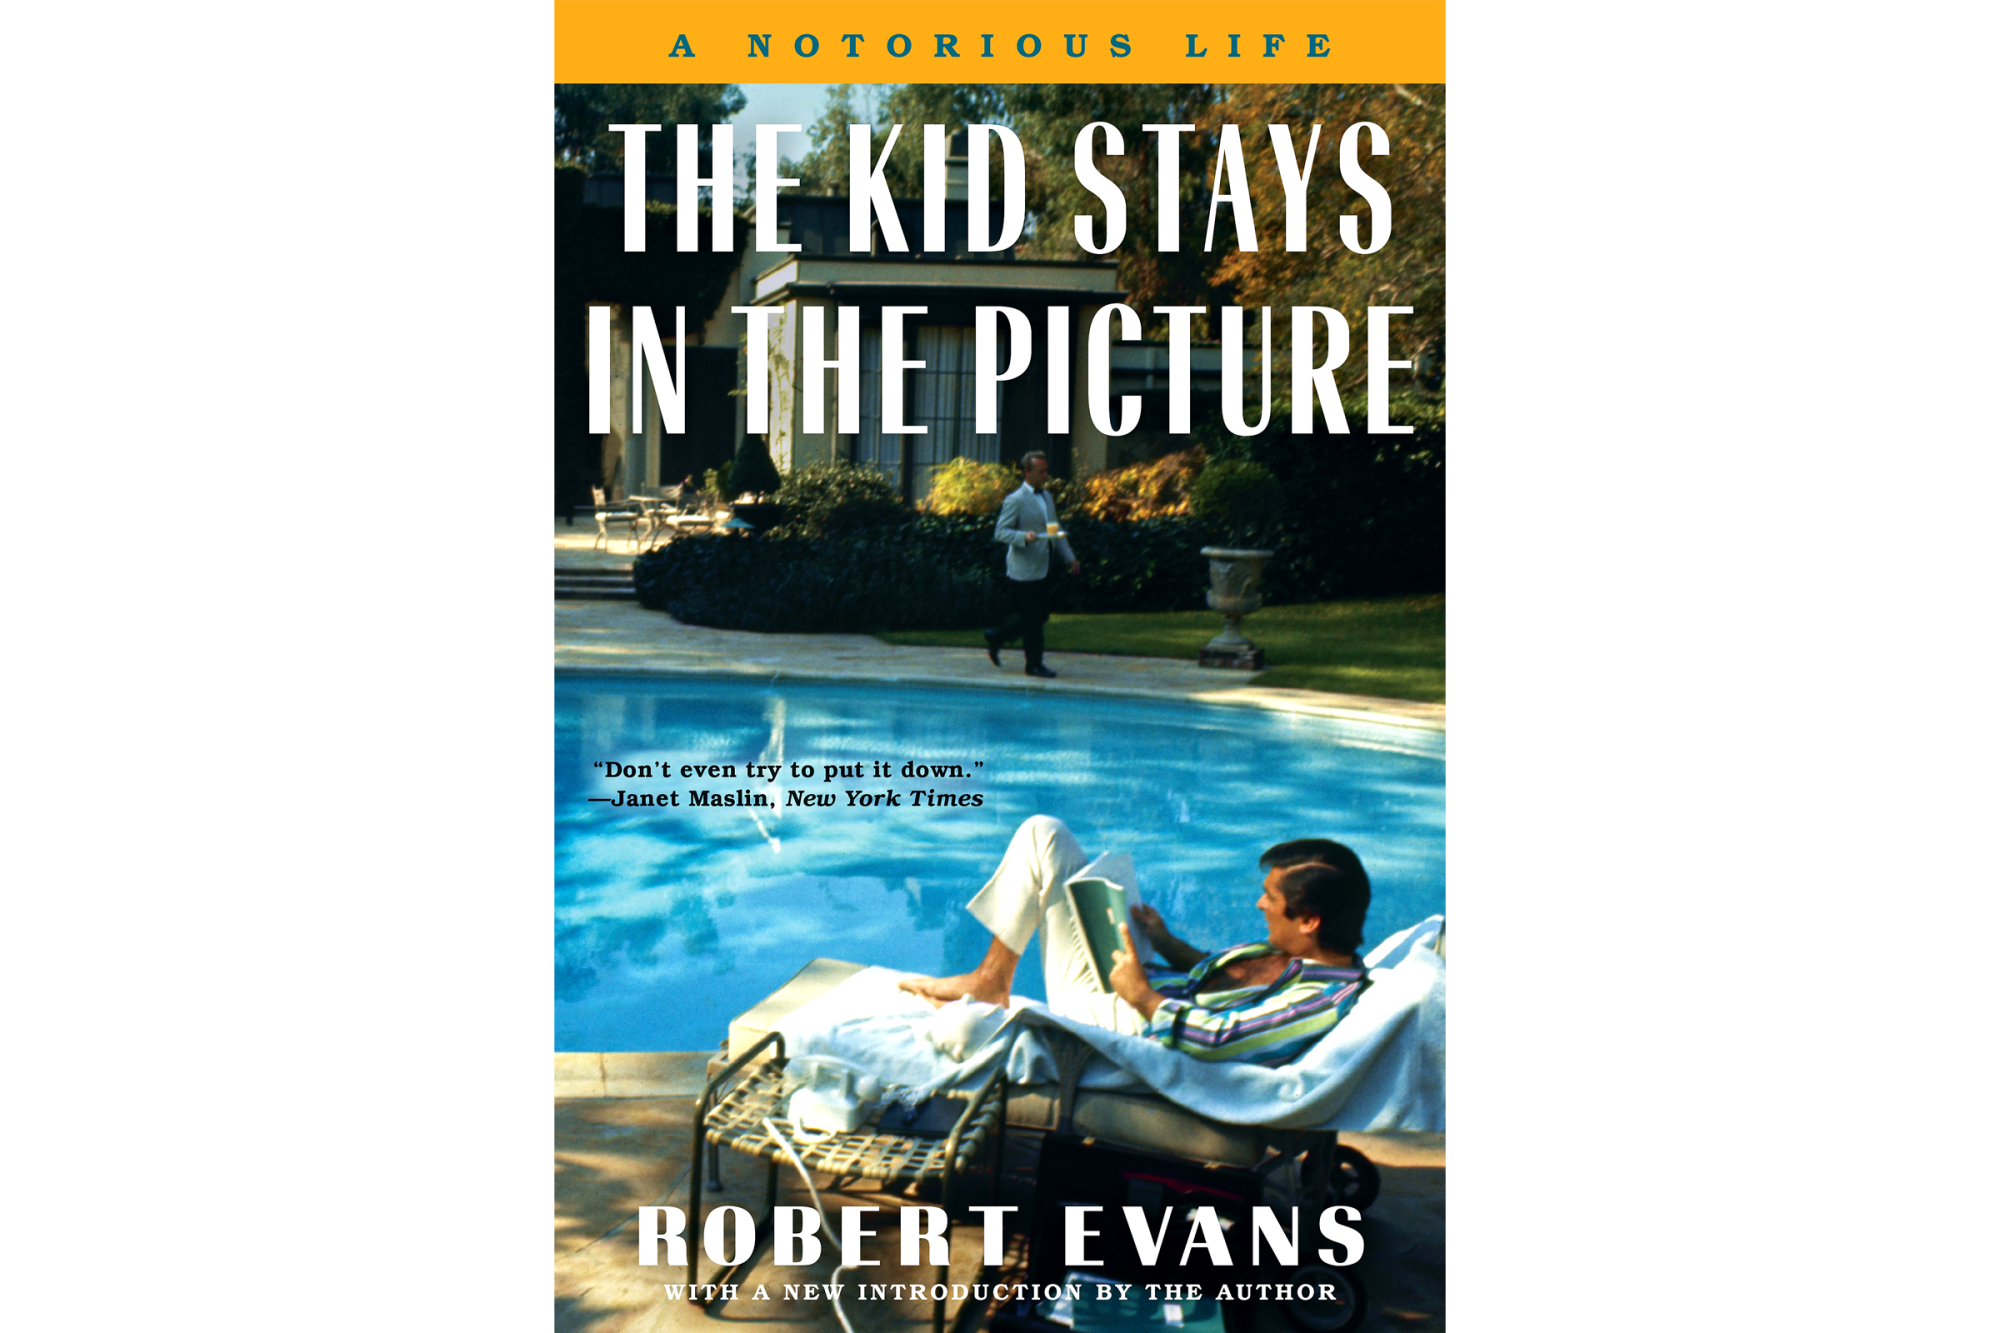 "The Kid Stays in the Picture: A Notorious Life" by Robert Evans